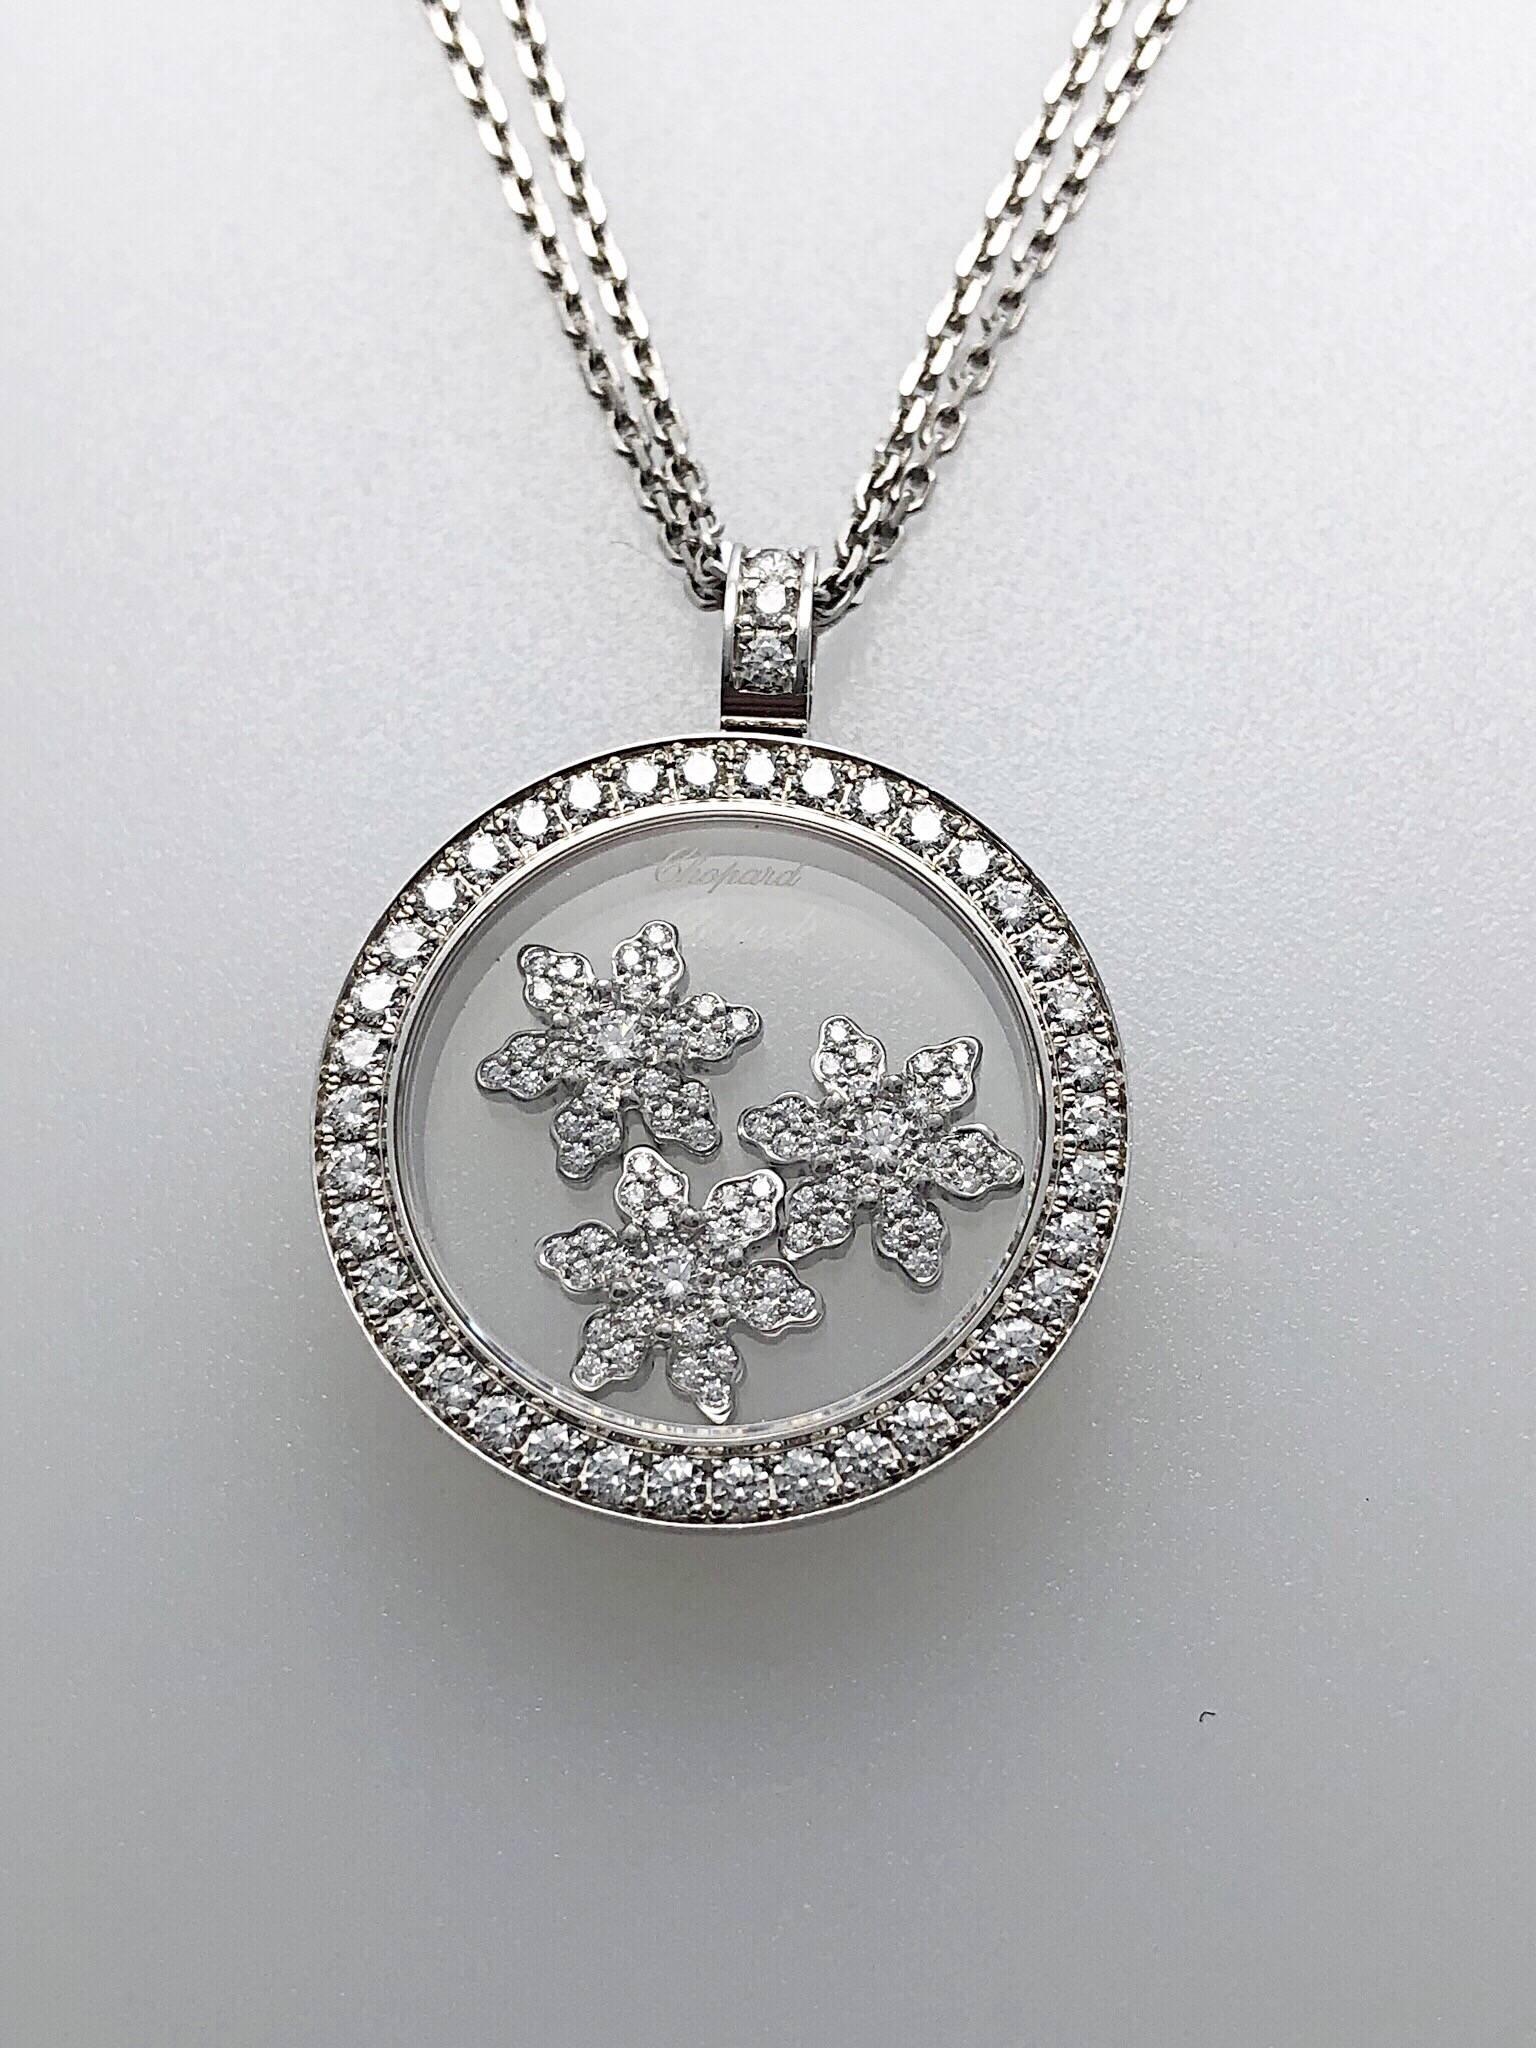 chopard snowflake necklace